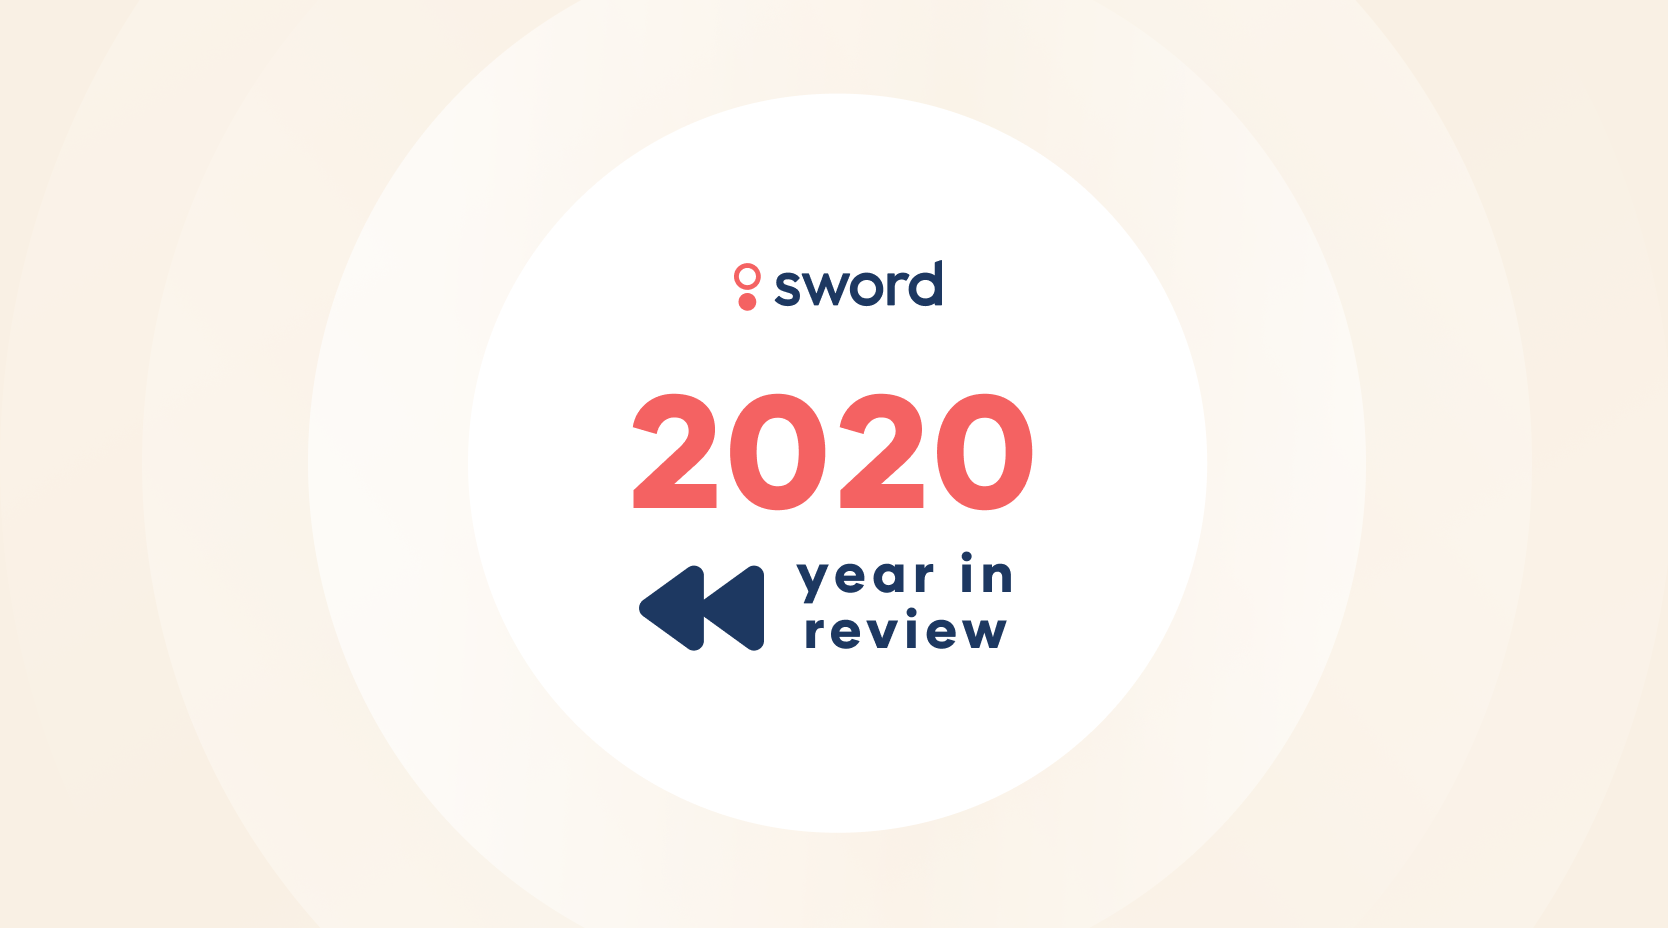 2020: Year in review